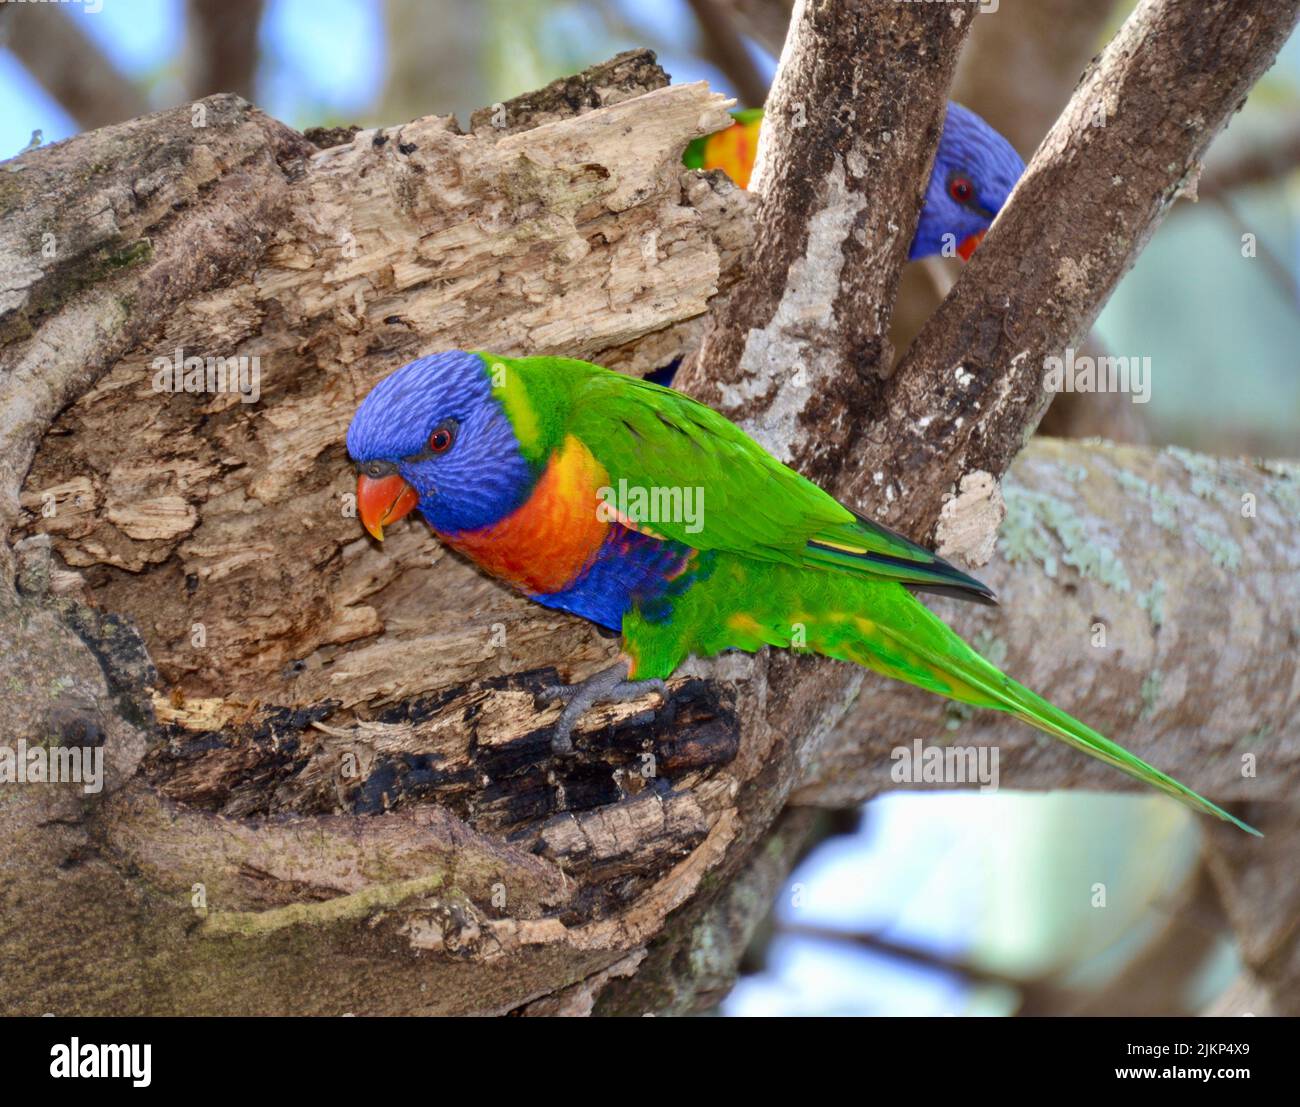 Bright purple, green and orange rainbow lorikeet parrt in a tree with a second bird in the background Stock Photo